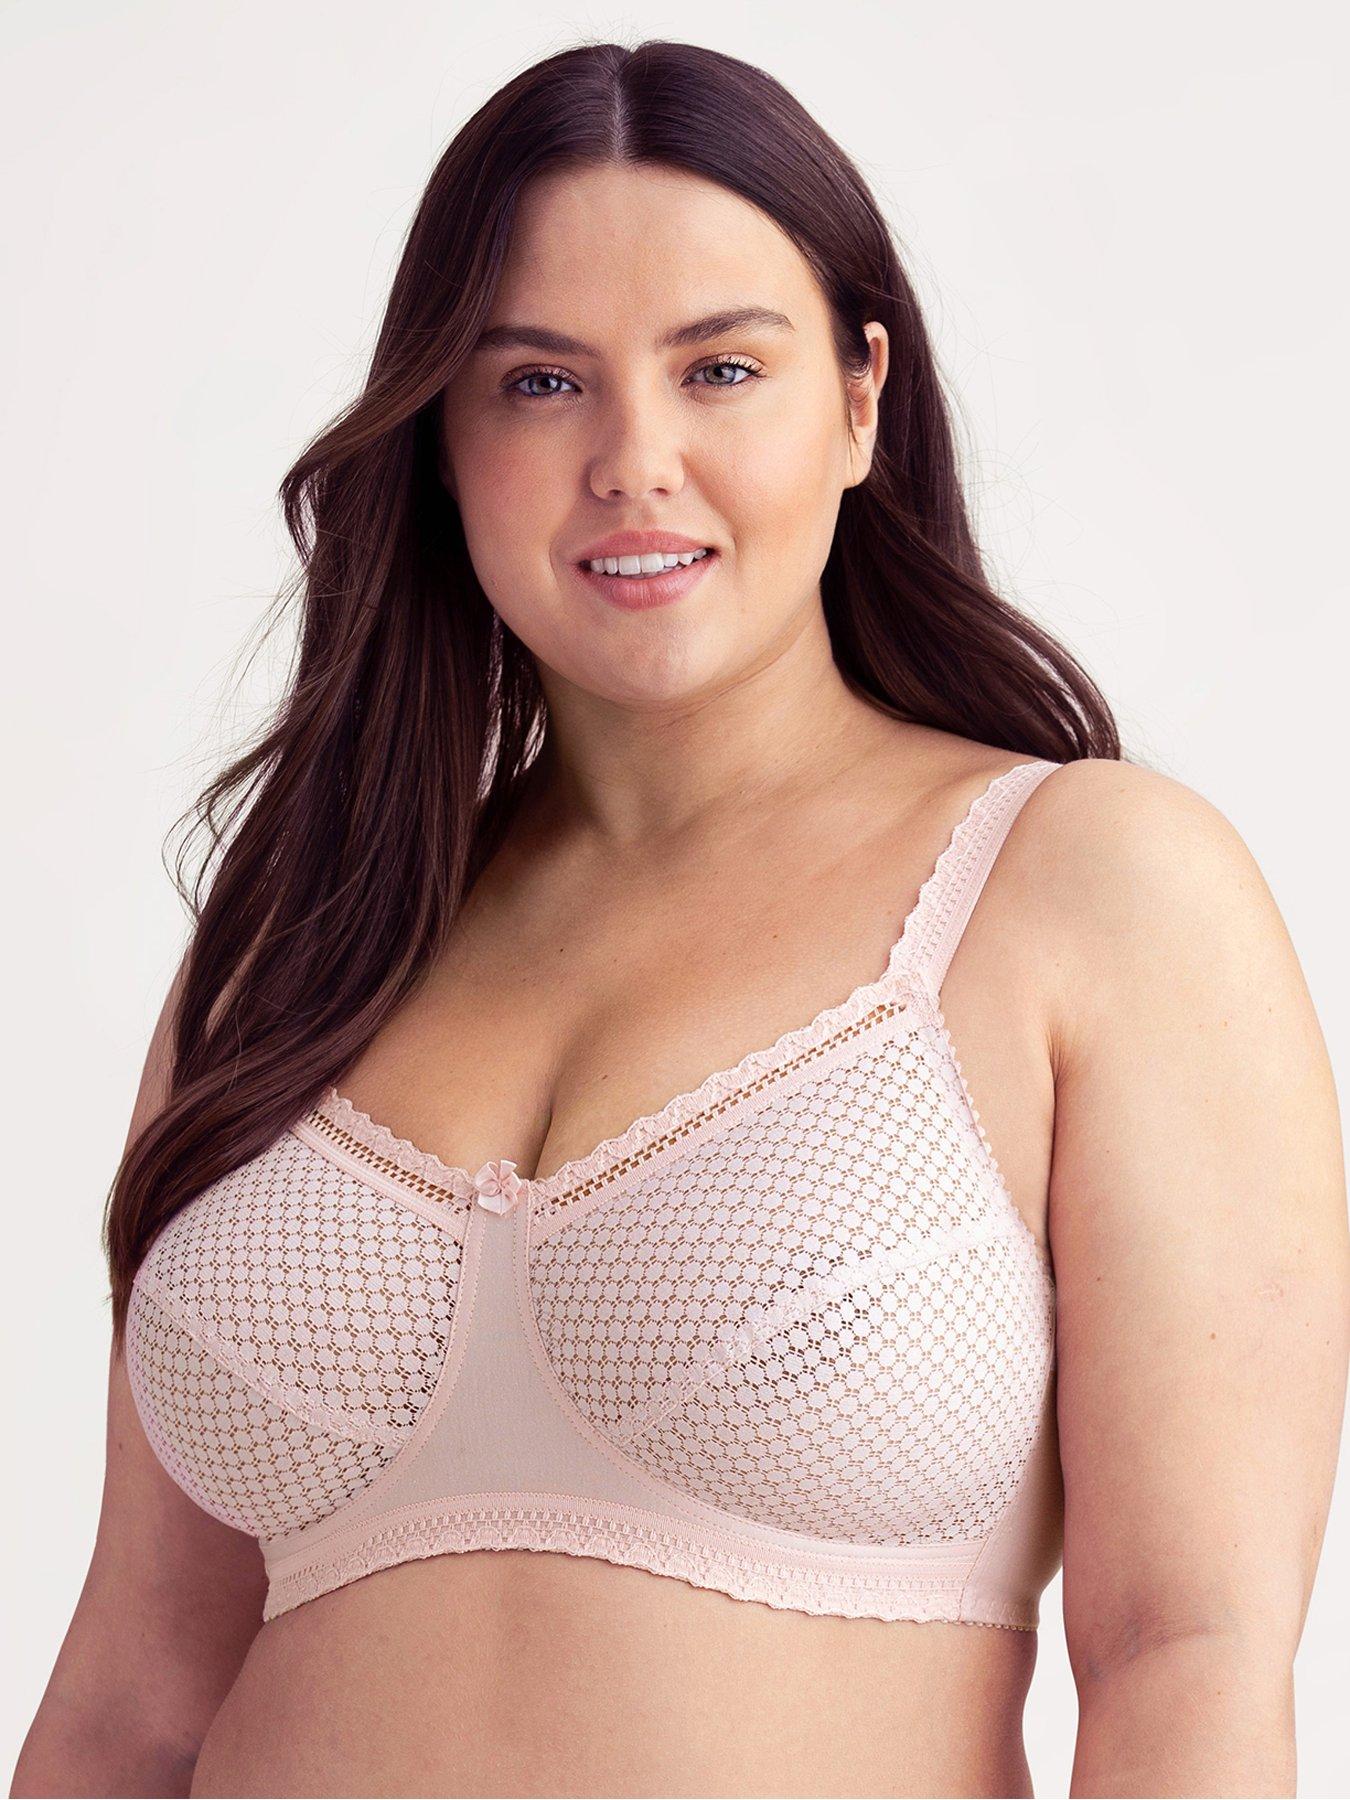 Smooth Lacy T-Shirt Non-Wired Bra by Miss Mary of Sweden